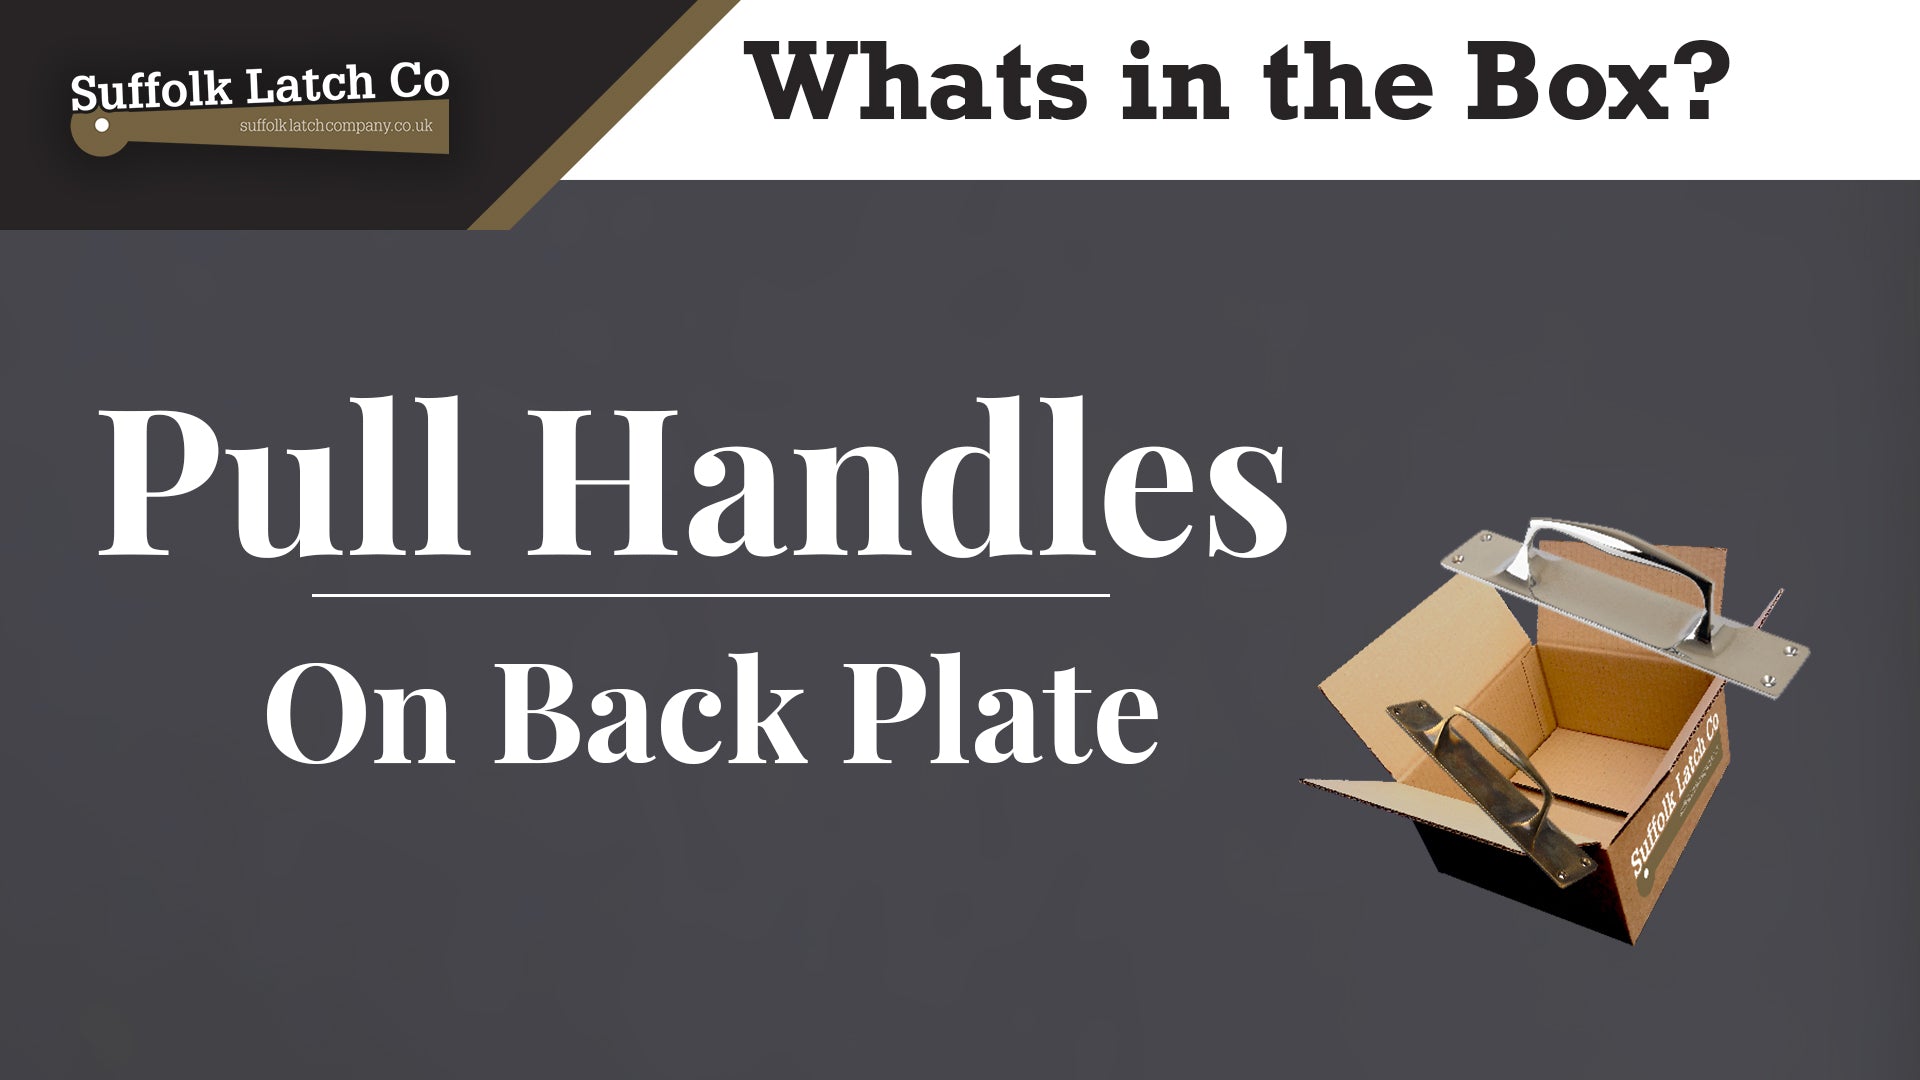 What's in the Box: Pull Handles On Back Plate